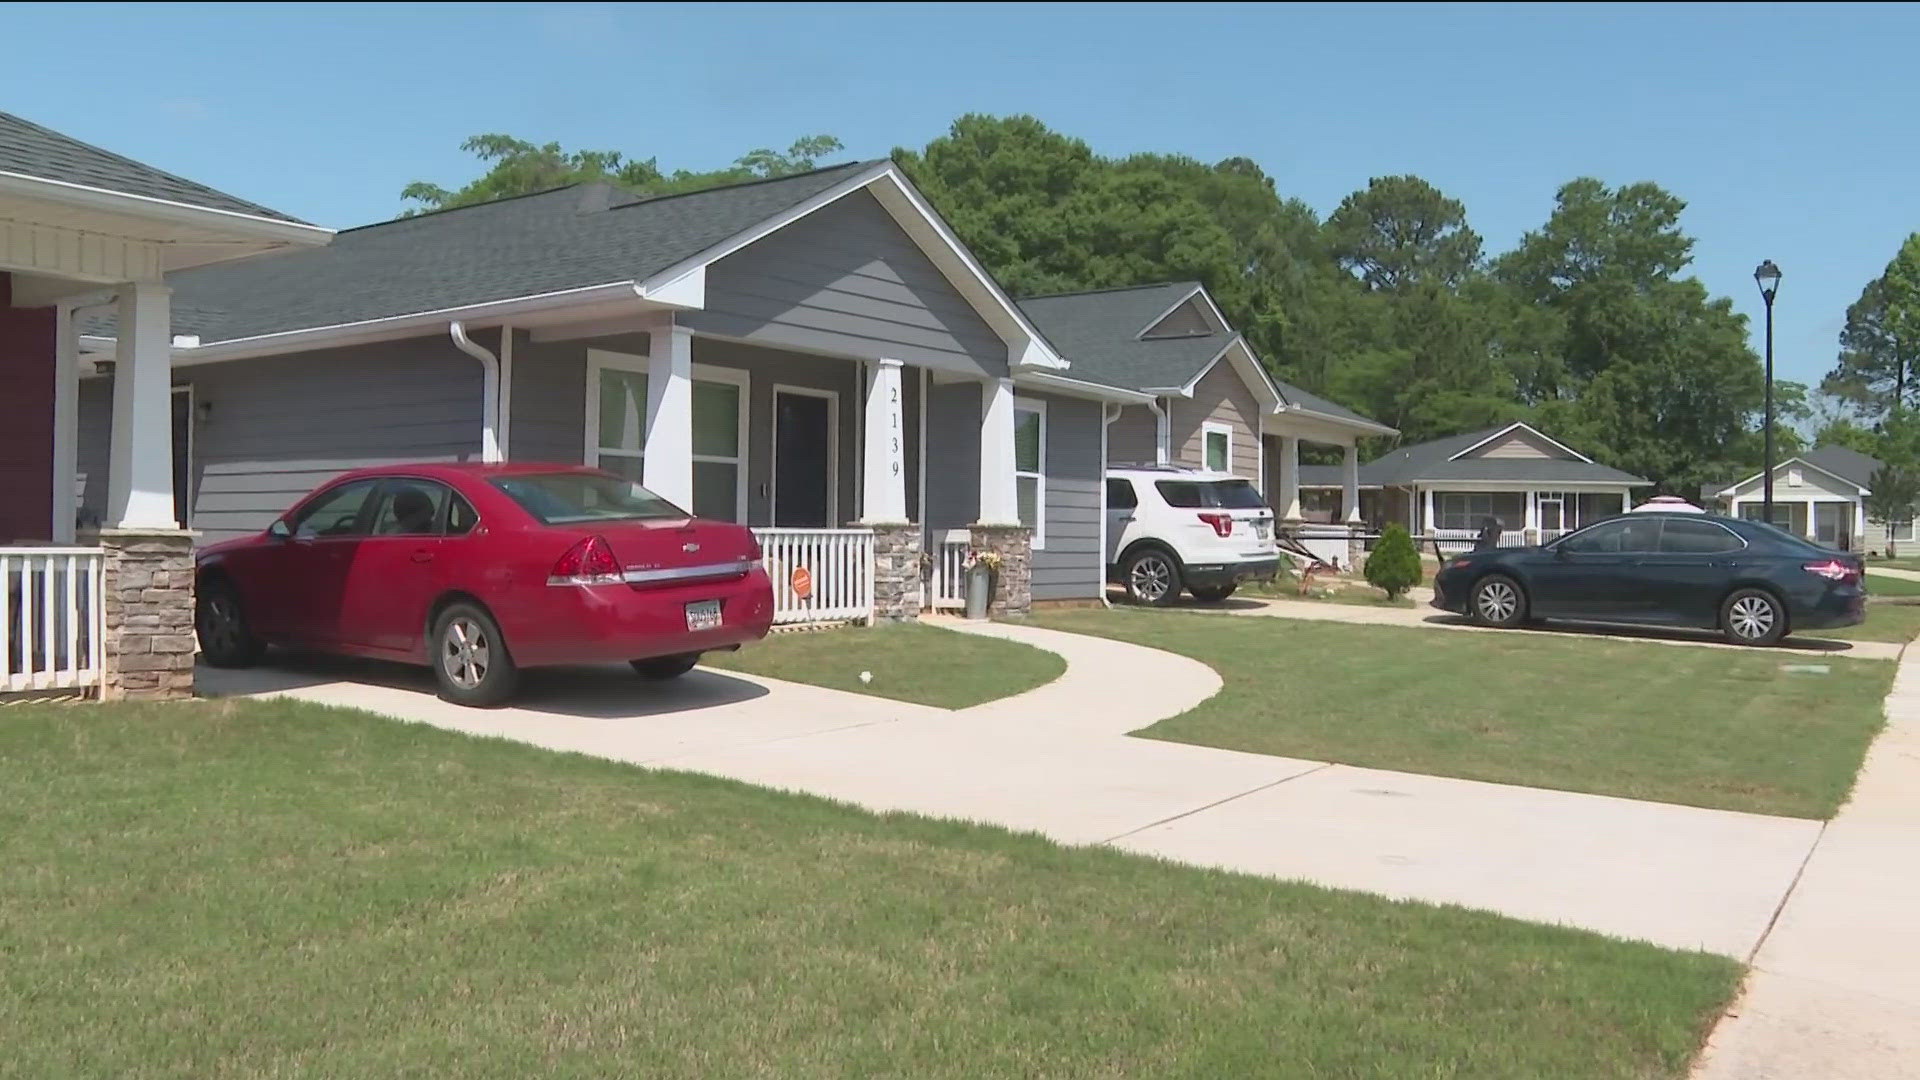 11Alive took a tour of the affordable housing neighborhood and spoke with a bus driver who said she never thought owning a home was possible, until now.